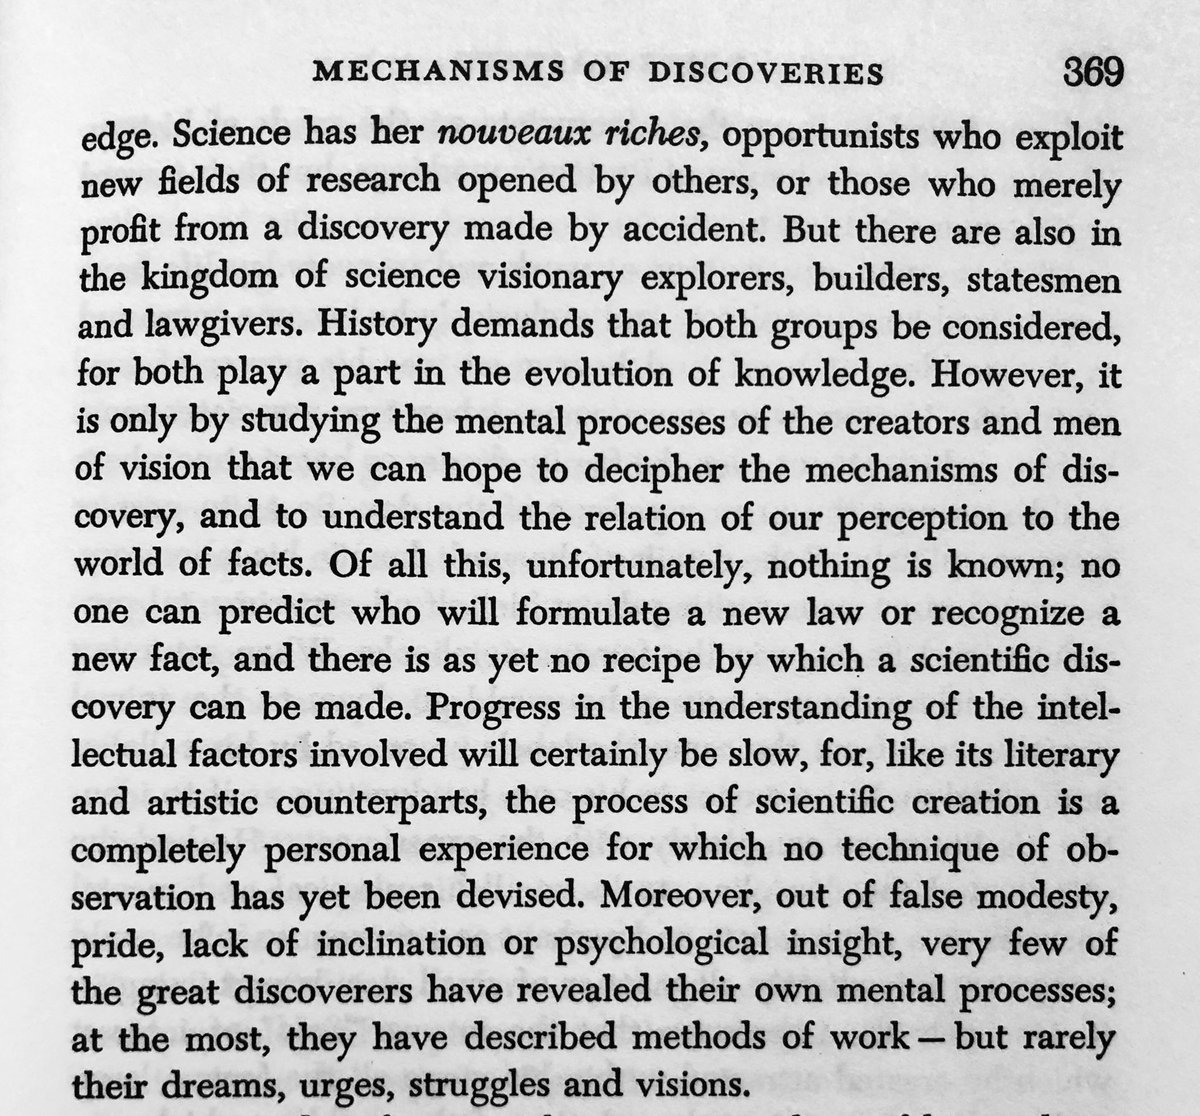 “Very few of the great discoverers have revealed their own mental processes; at the most, they have described methods of work—but rarely their dreams, urges, struggles and visions”